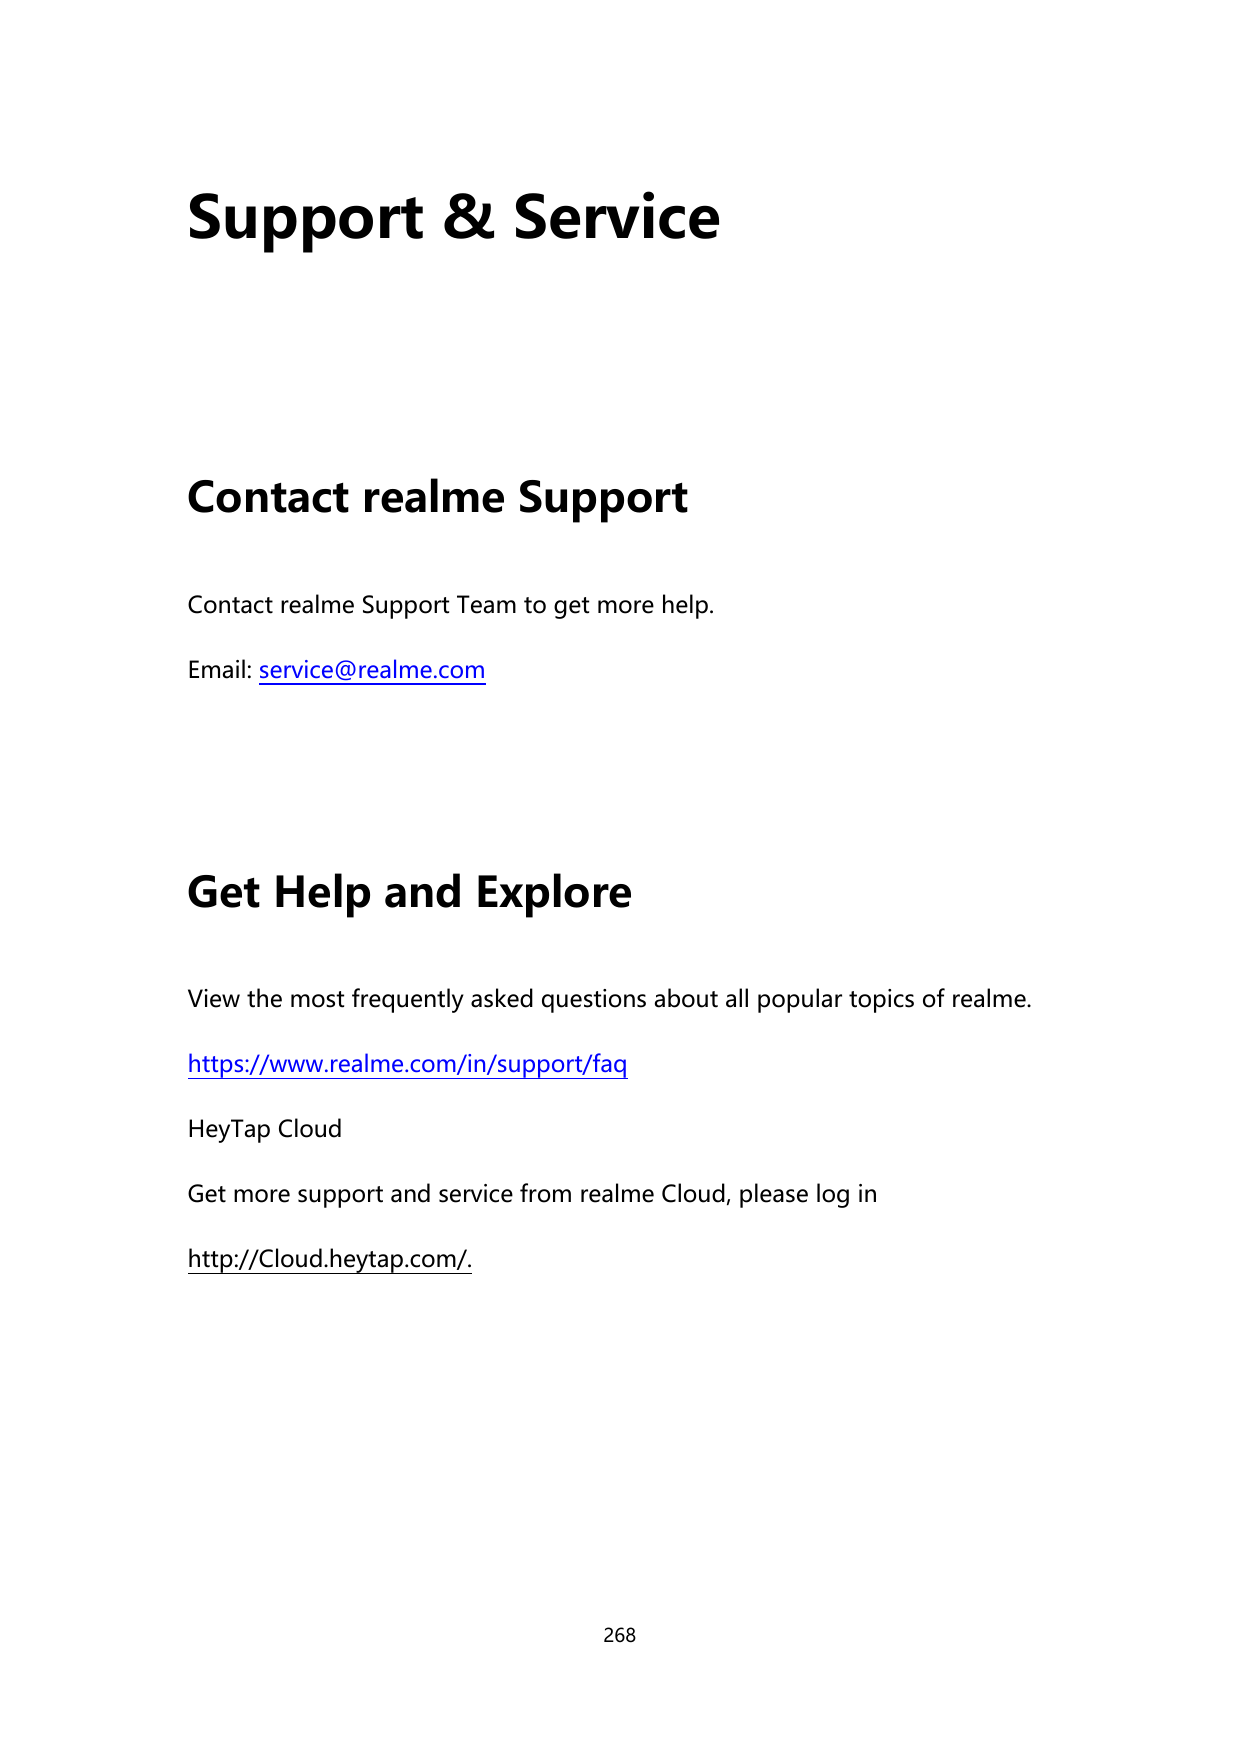 Support & ServiceContact realme SupportContact realme Support Team to get more help.Email: service@realme.comGet Help and Explor